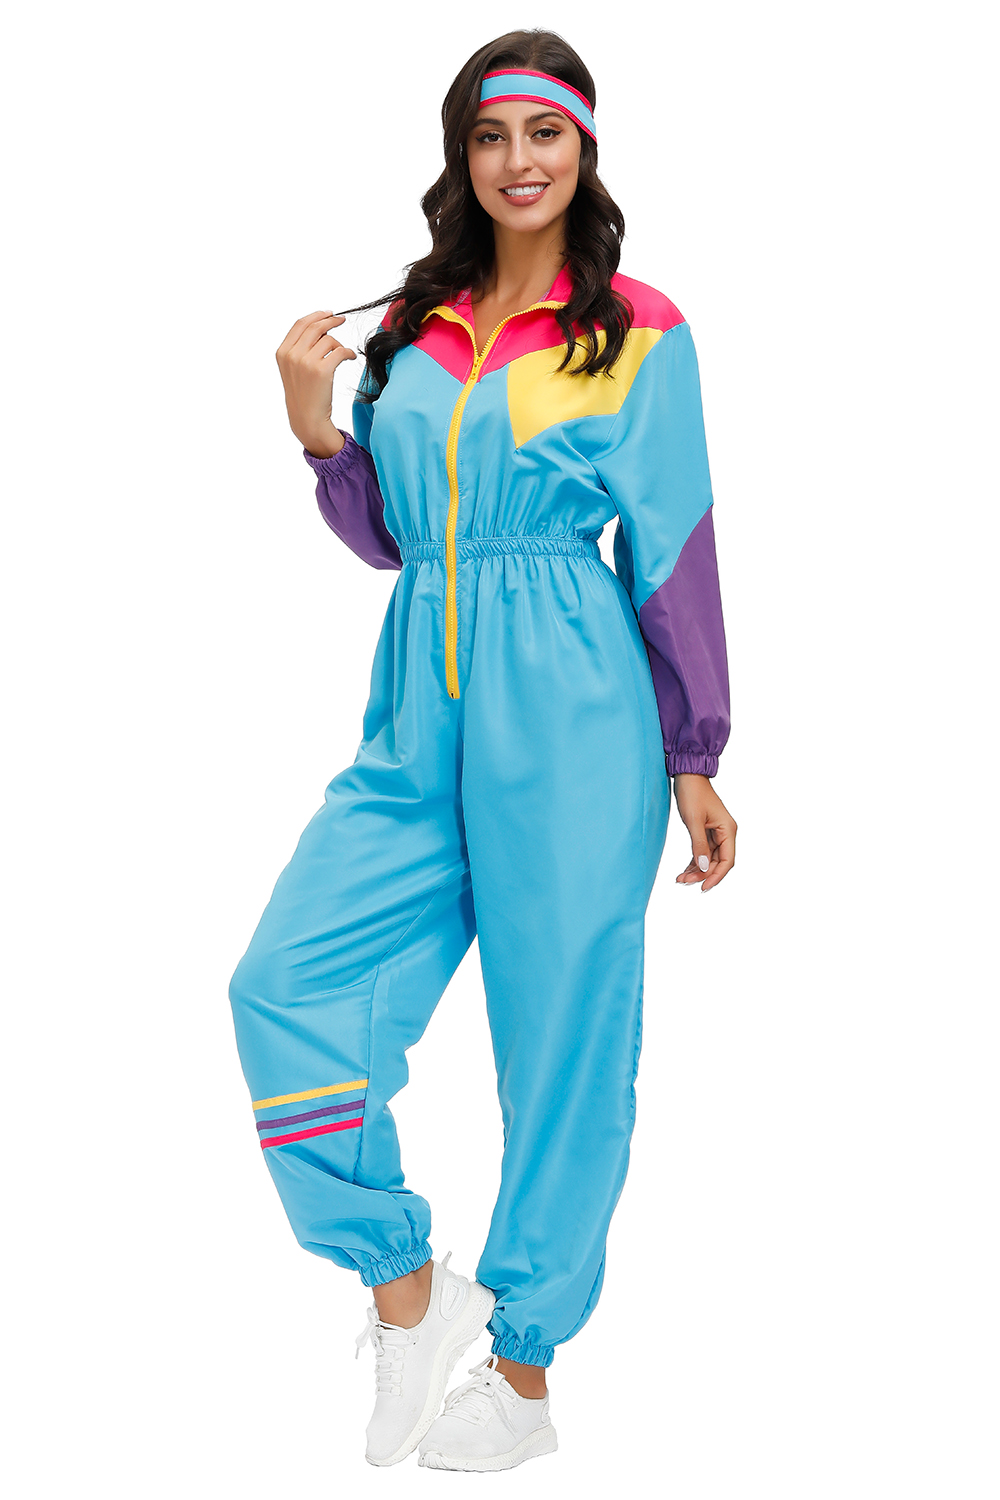 Womens 2 Pc Awesome 80s Ski Suit Costume